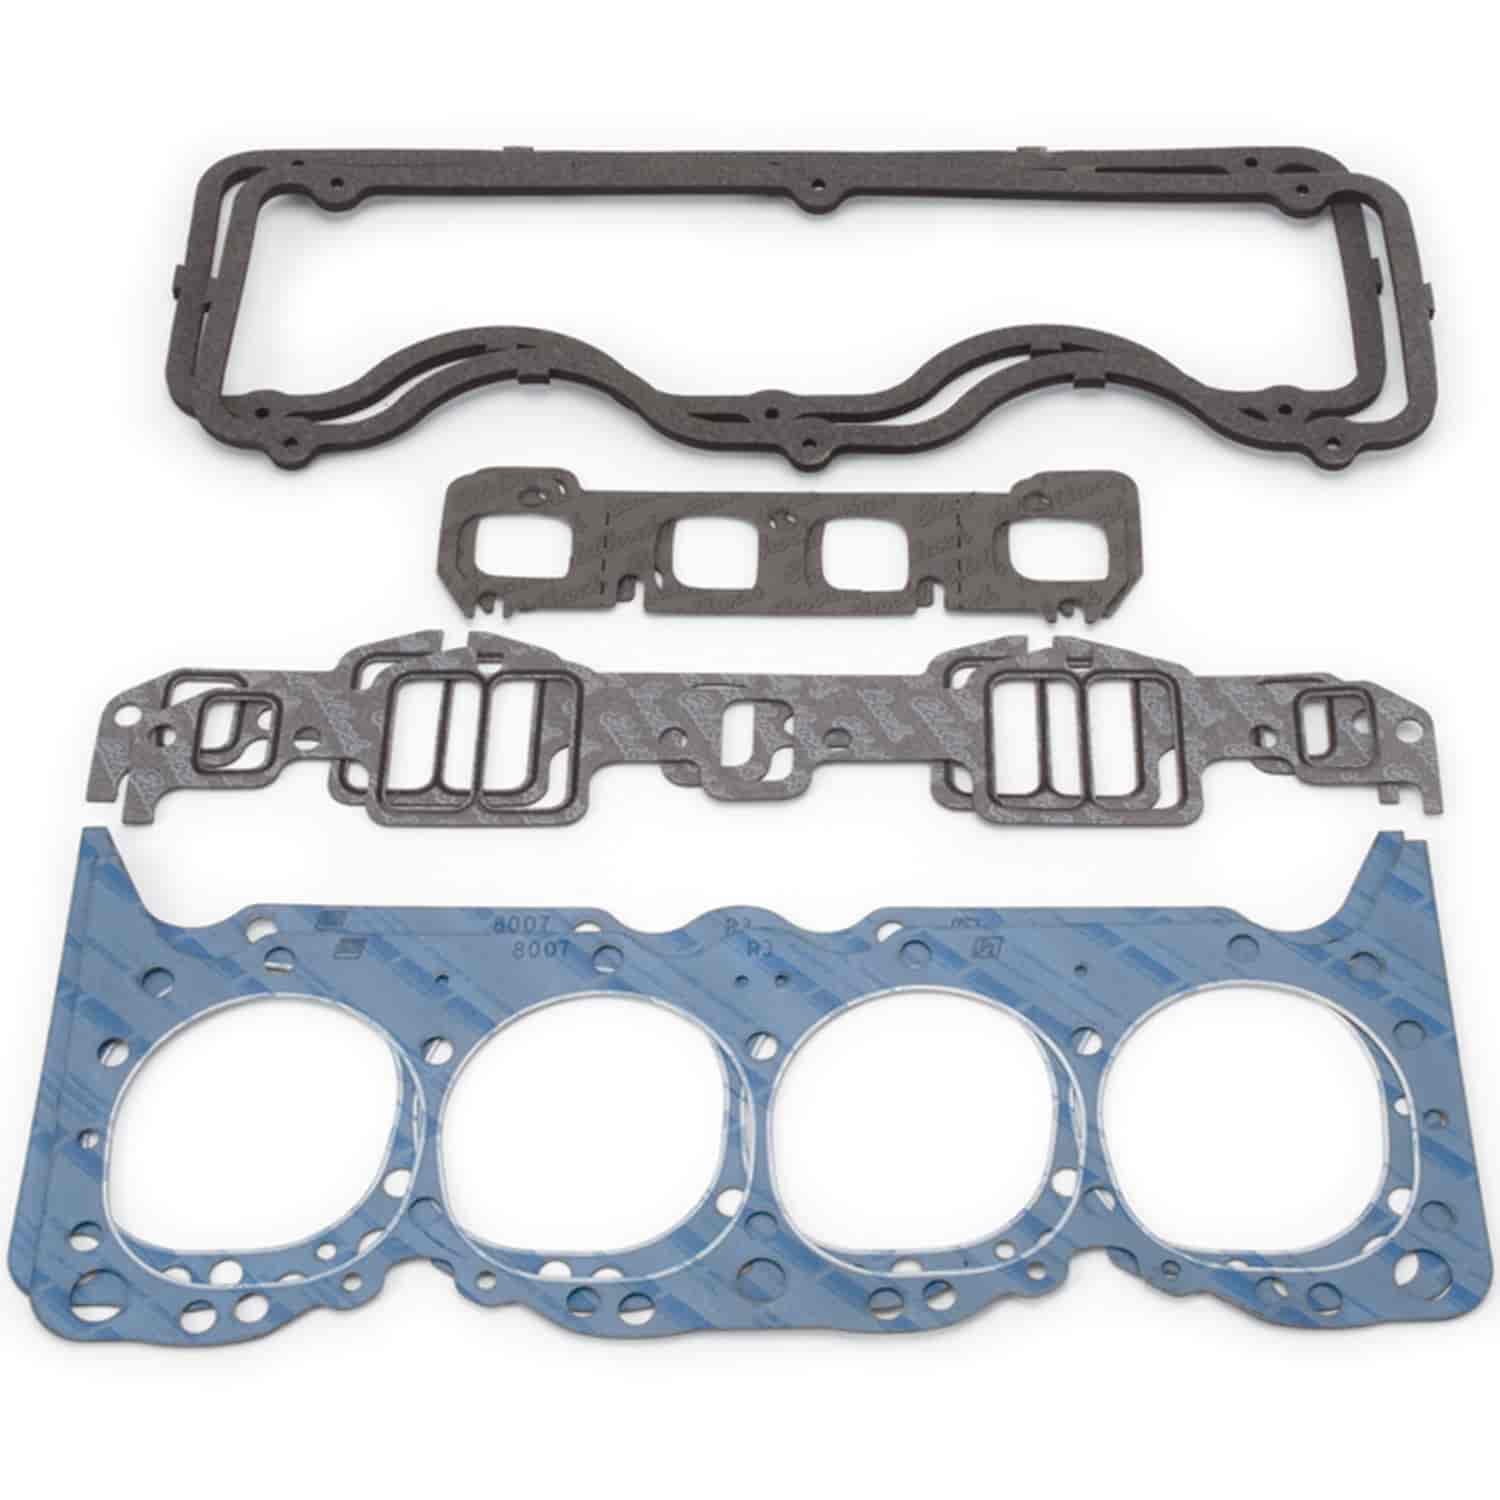 Complete Head Gasket Set for Chevy 348/409 W-Series